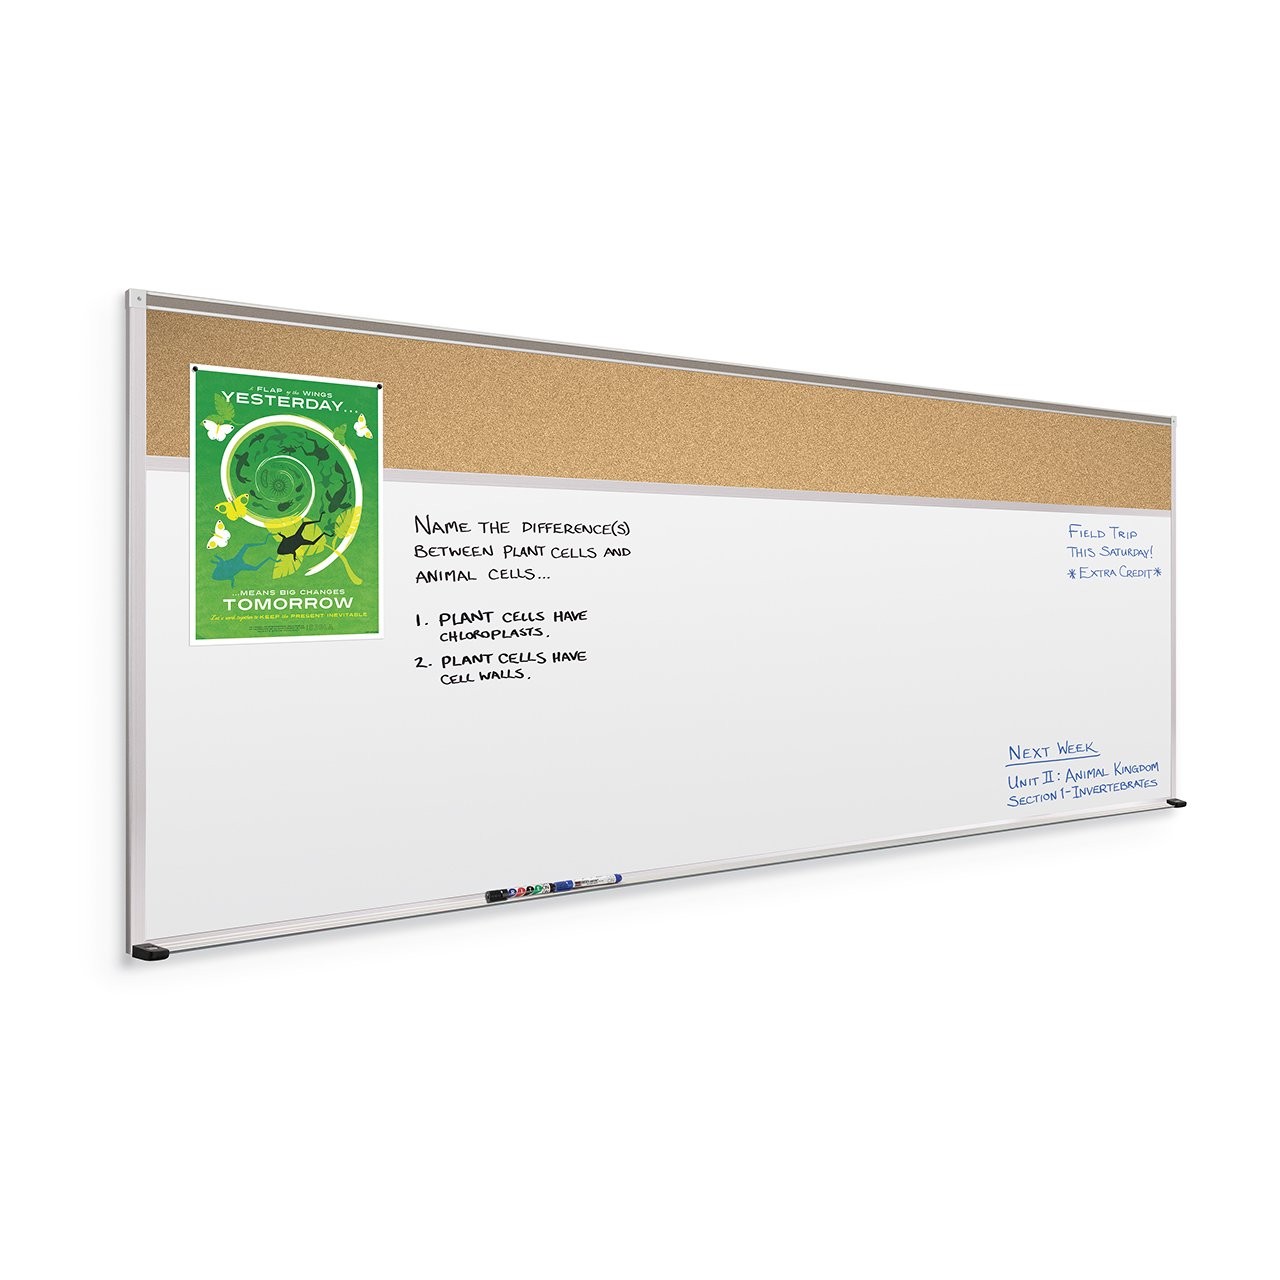 Mooreco Combination Type C Board Porcelain Steel Whiteboard Surface 4'H x 6'W